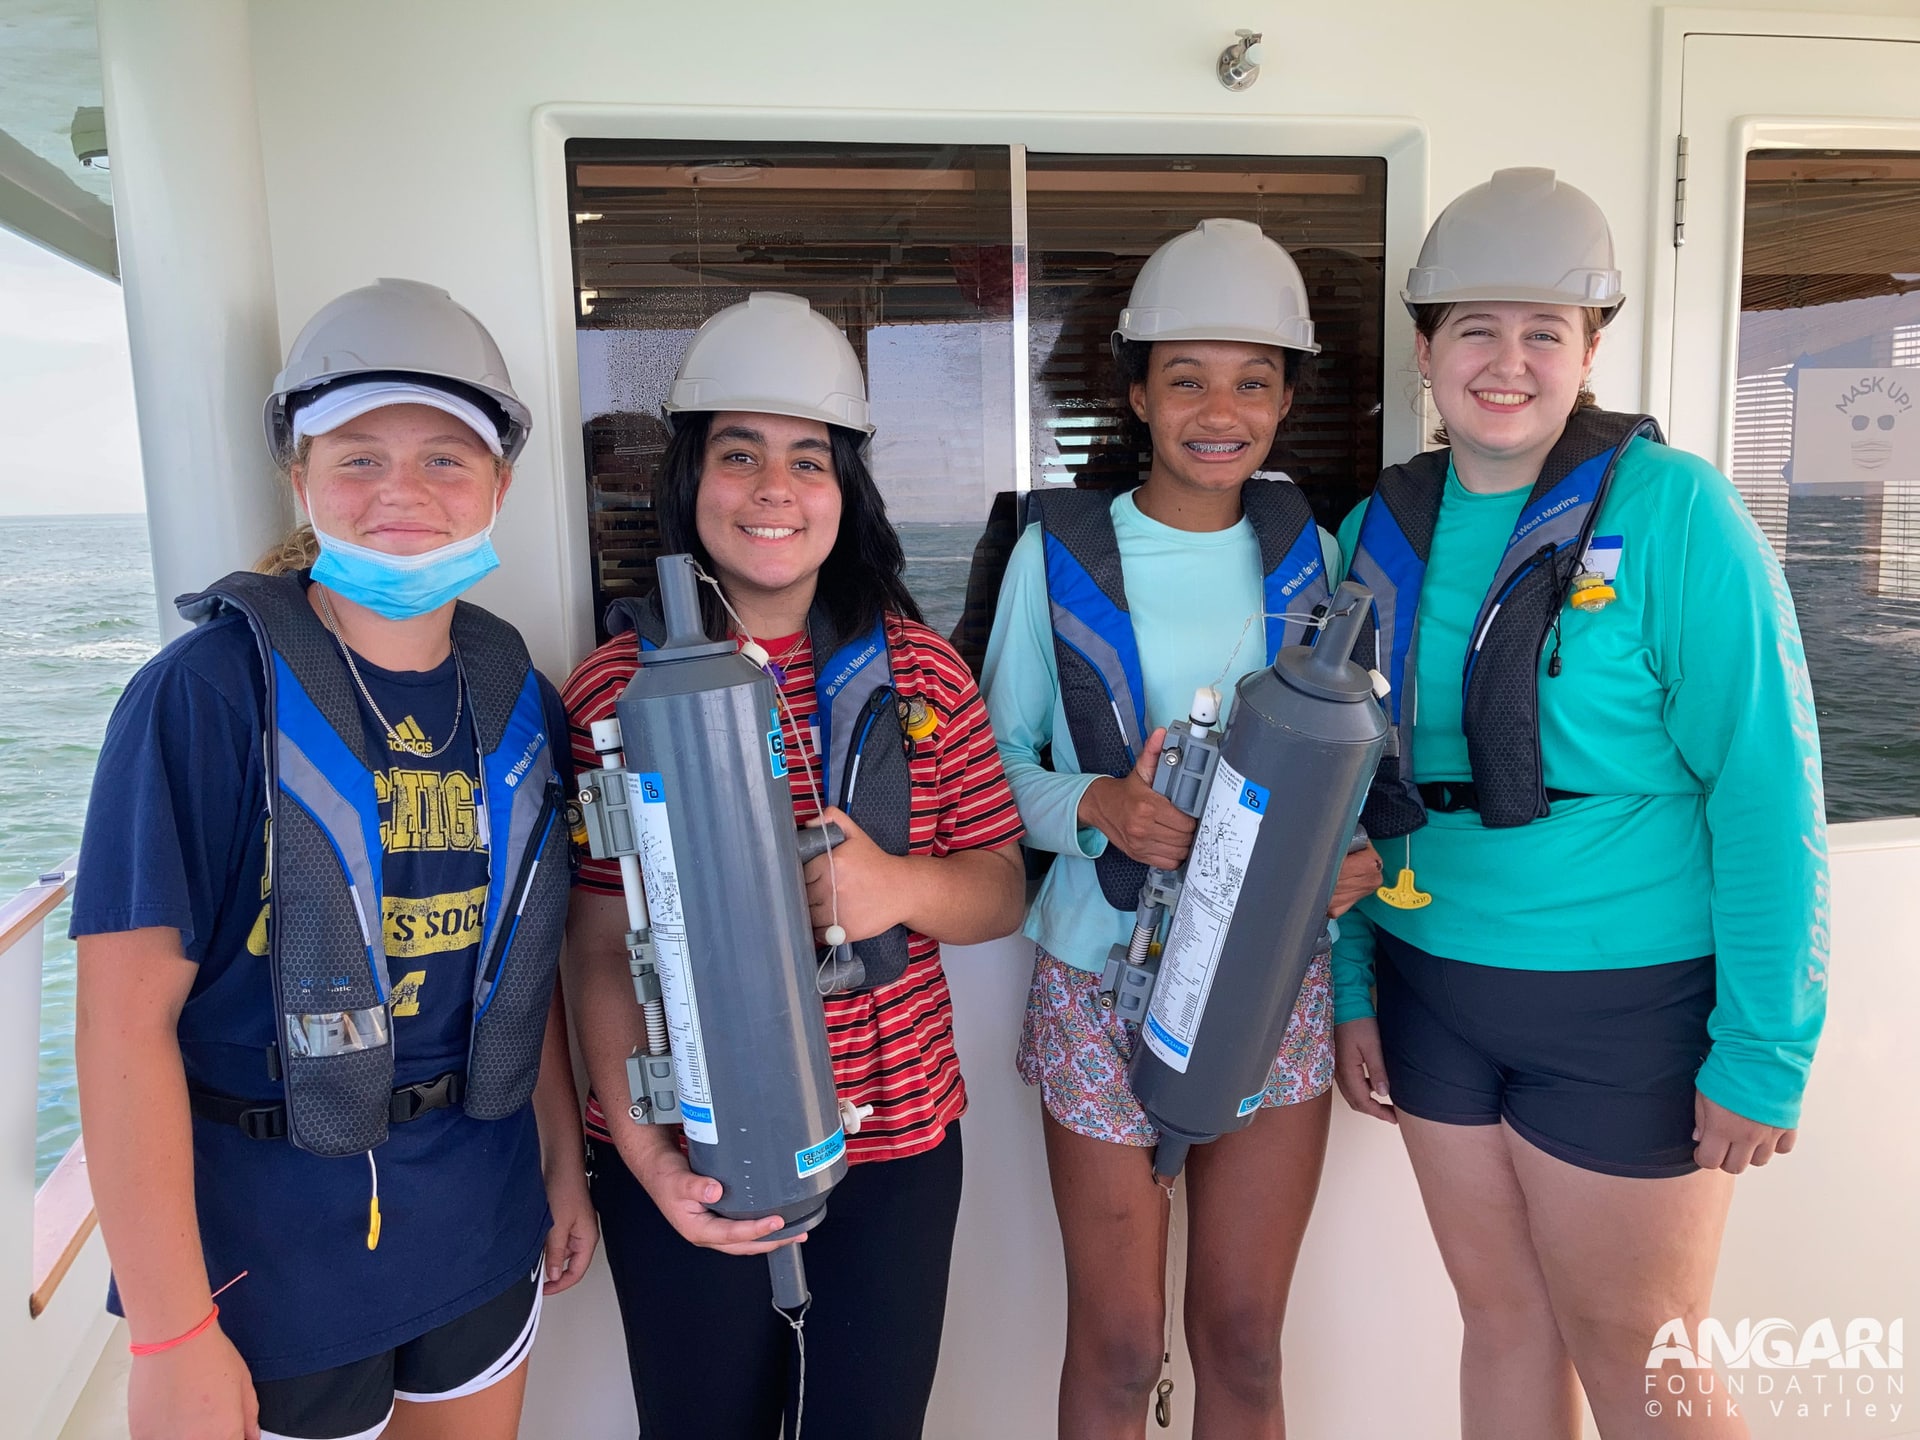 EXP 40: Ready For Action! Campers Worked In Teams To Deploy Niskin Bottles And Collect Water Samples. PC: Nik Varley